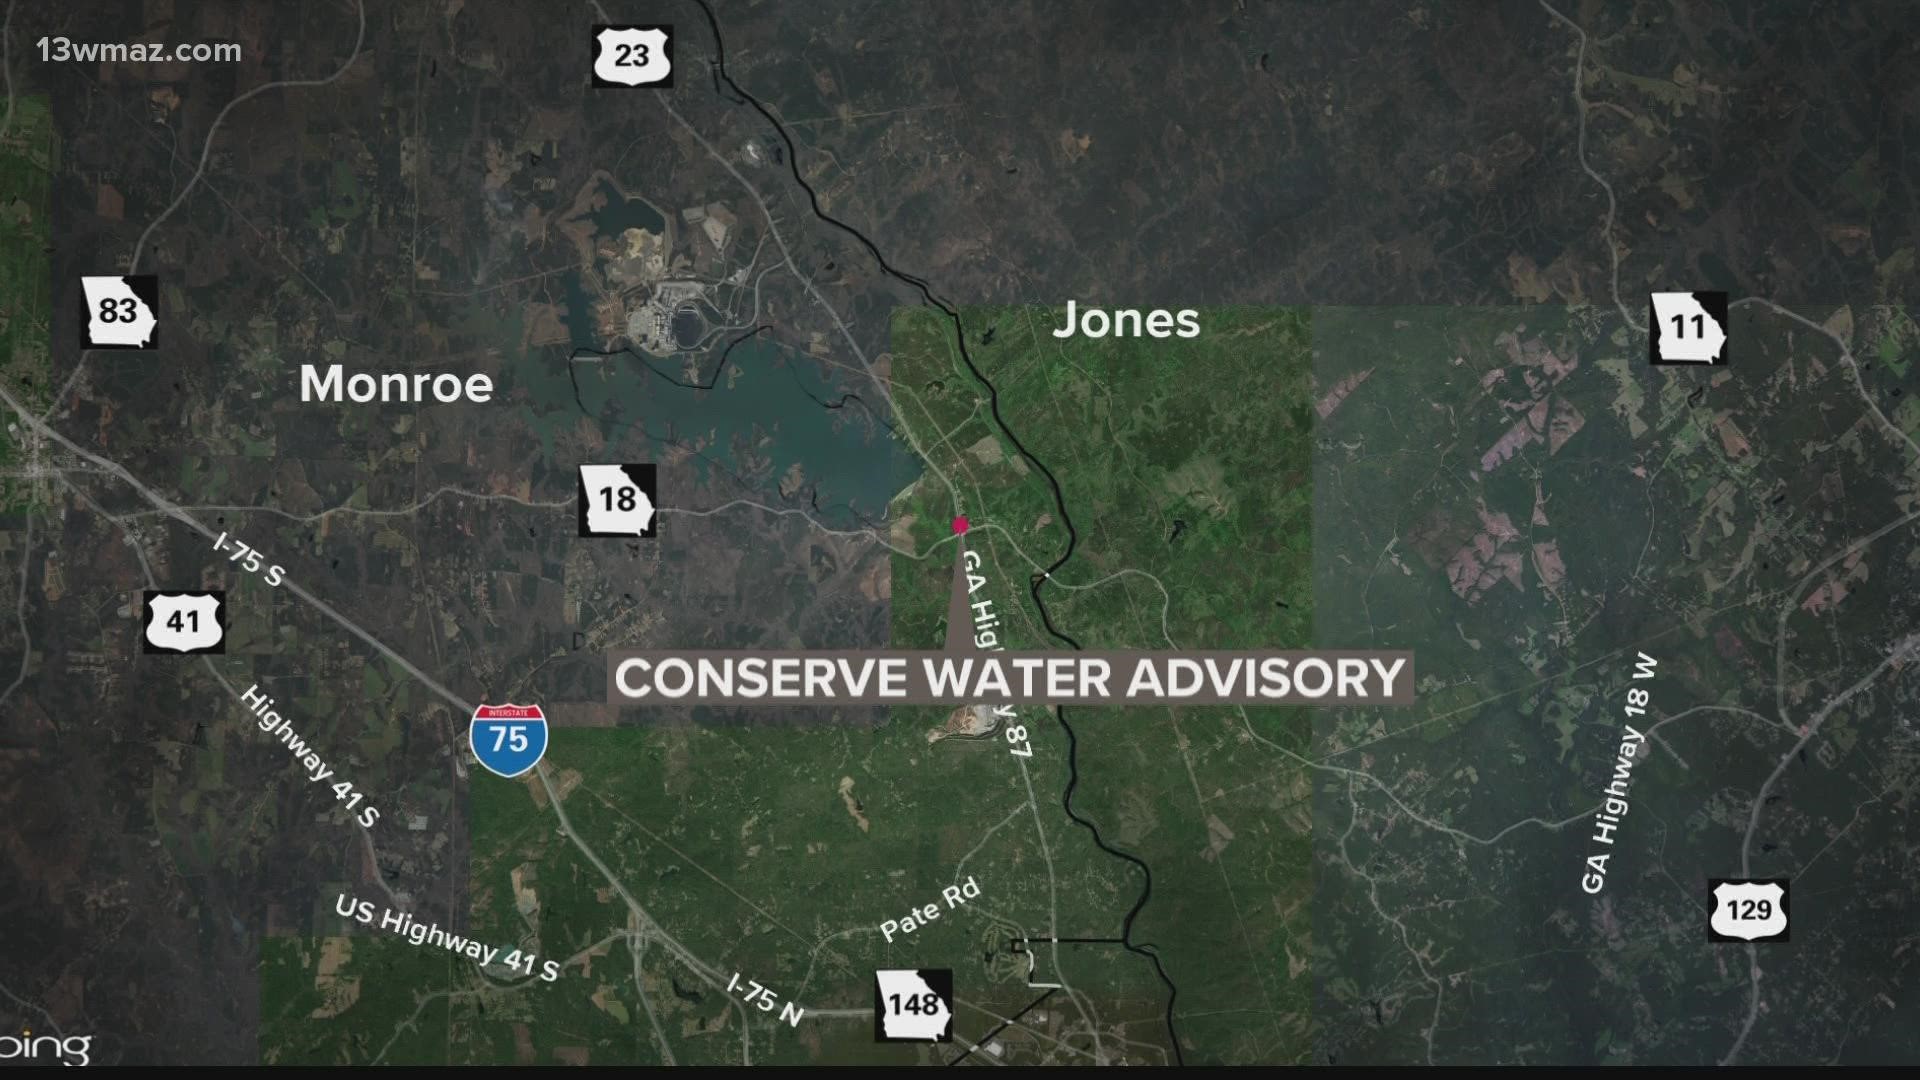 People in Jones, Butts, Monroe, and Baldwin counties are all experiencing issues with water outages after freezing weekend temps.